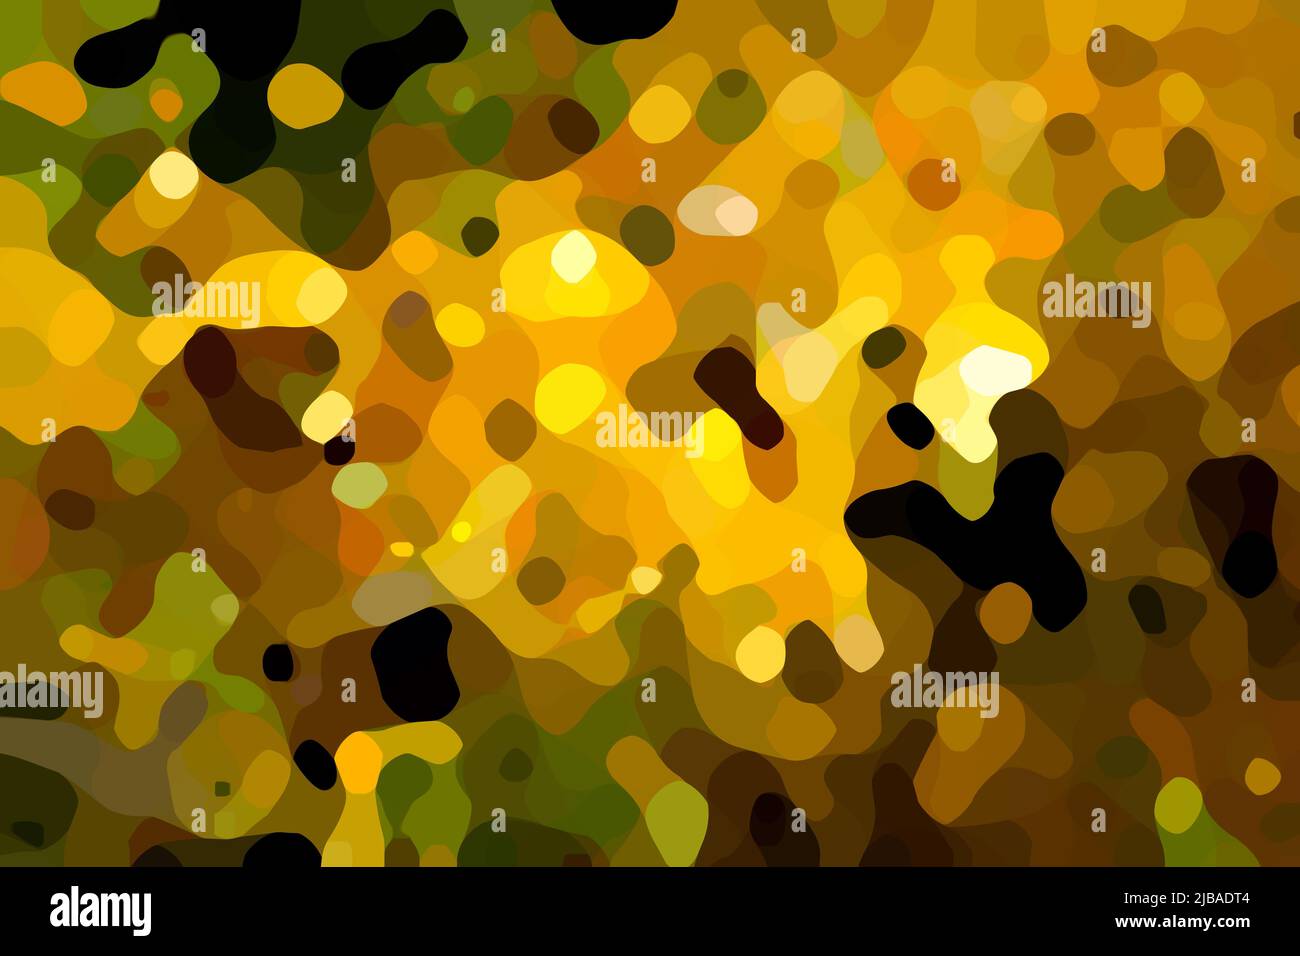 Abstract and contemporary digital art camouflage pattern Stock Photo